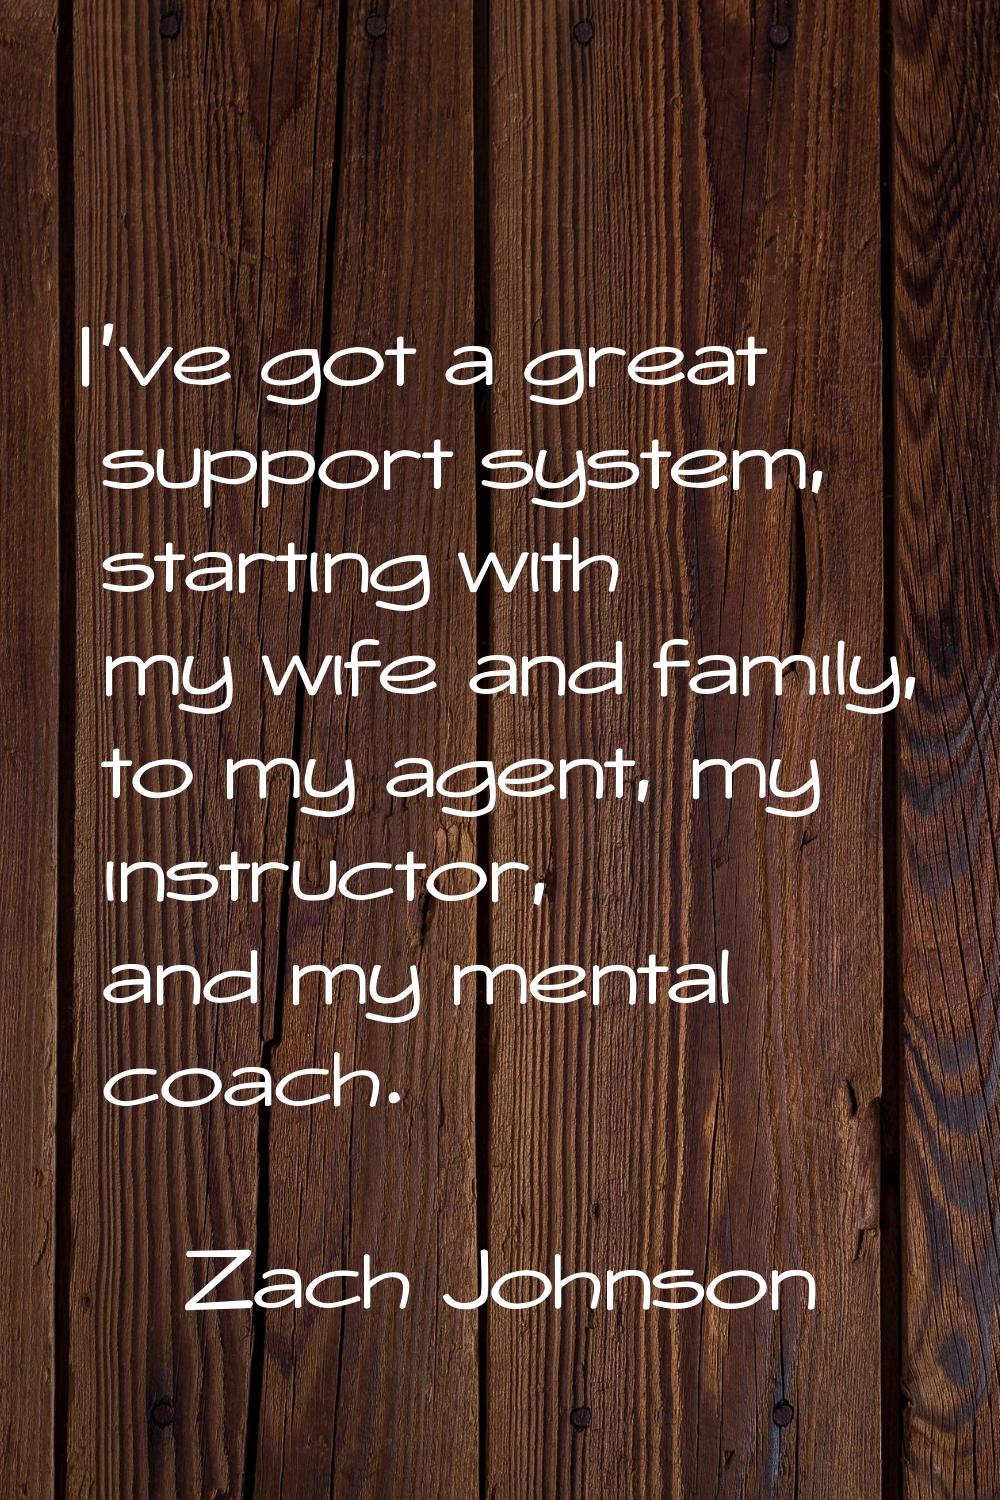 I've got a great support system, starting with my wife and family, to my agent, my instructor, and 